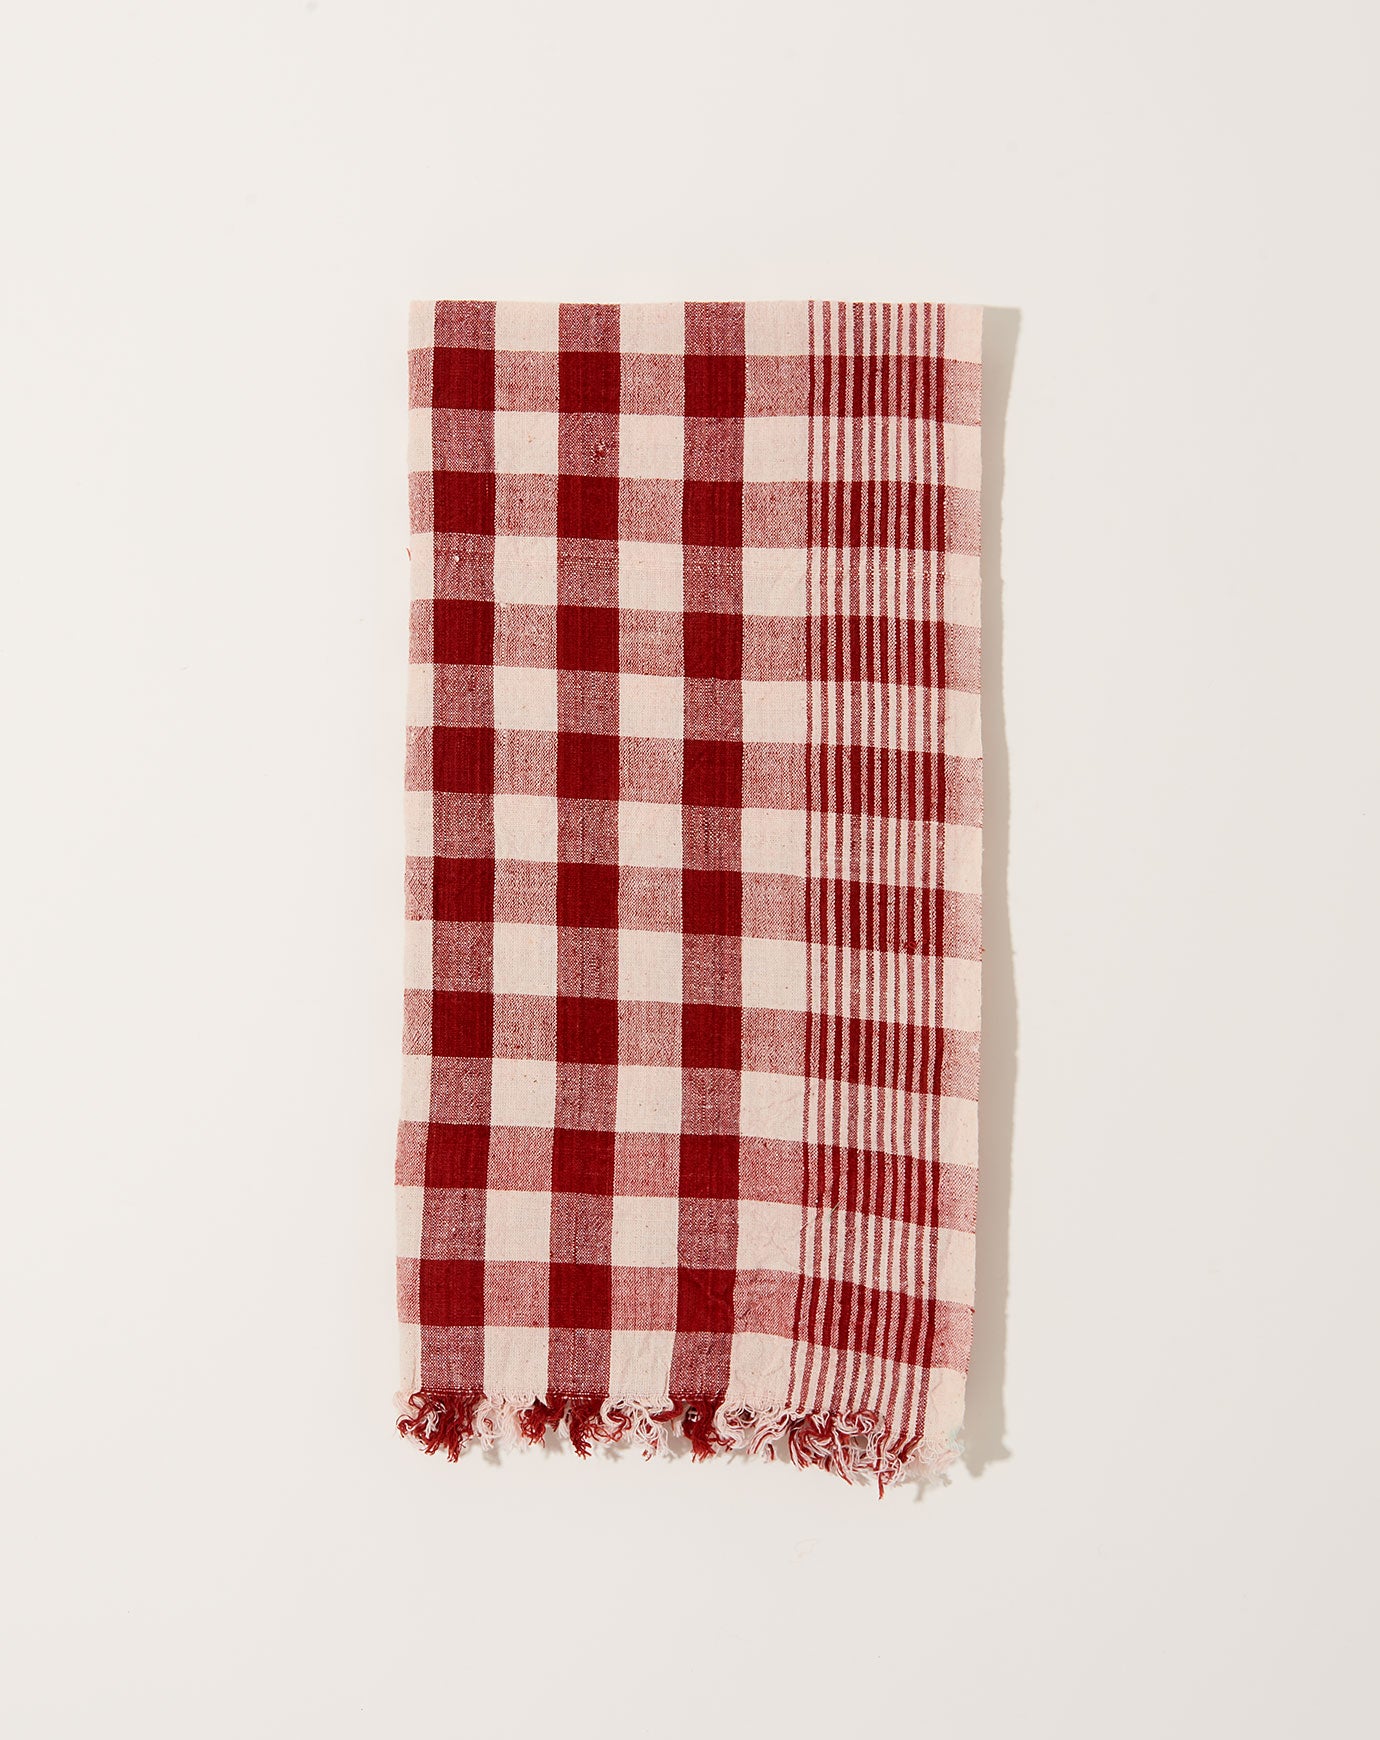 Auntie Oti Natural Dye Check Towel in Red